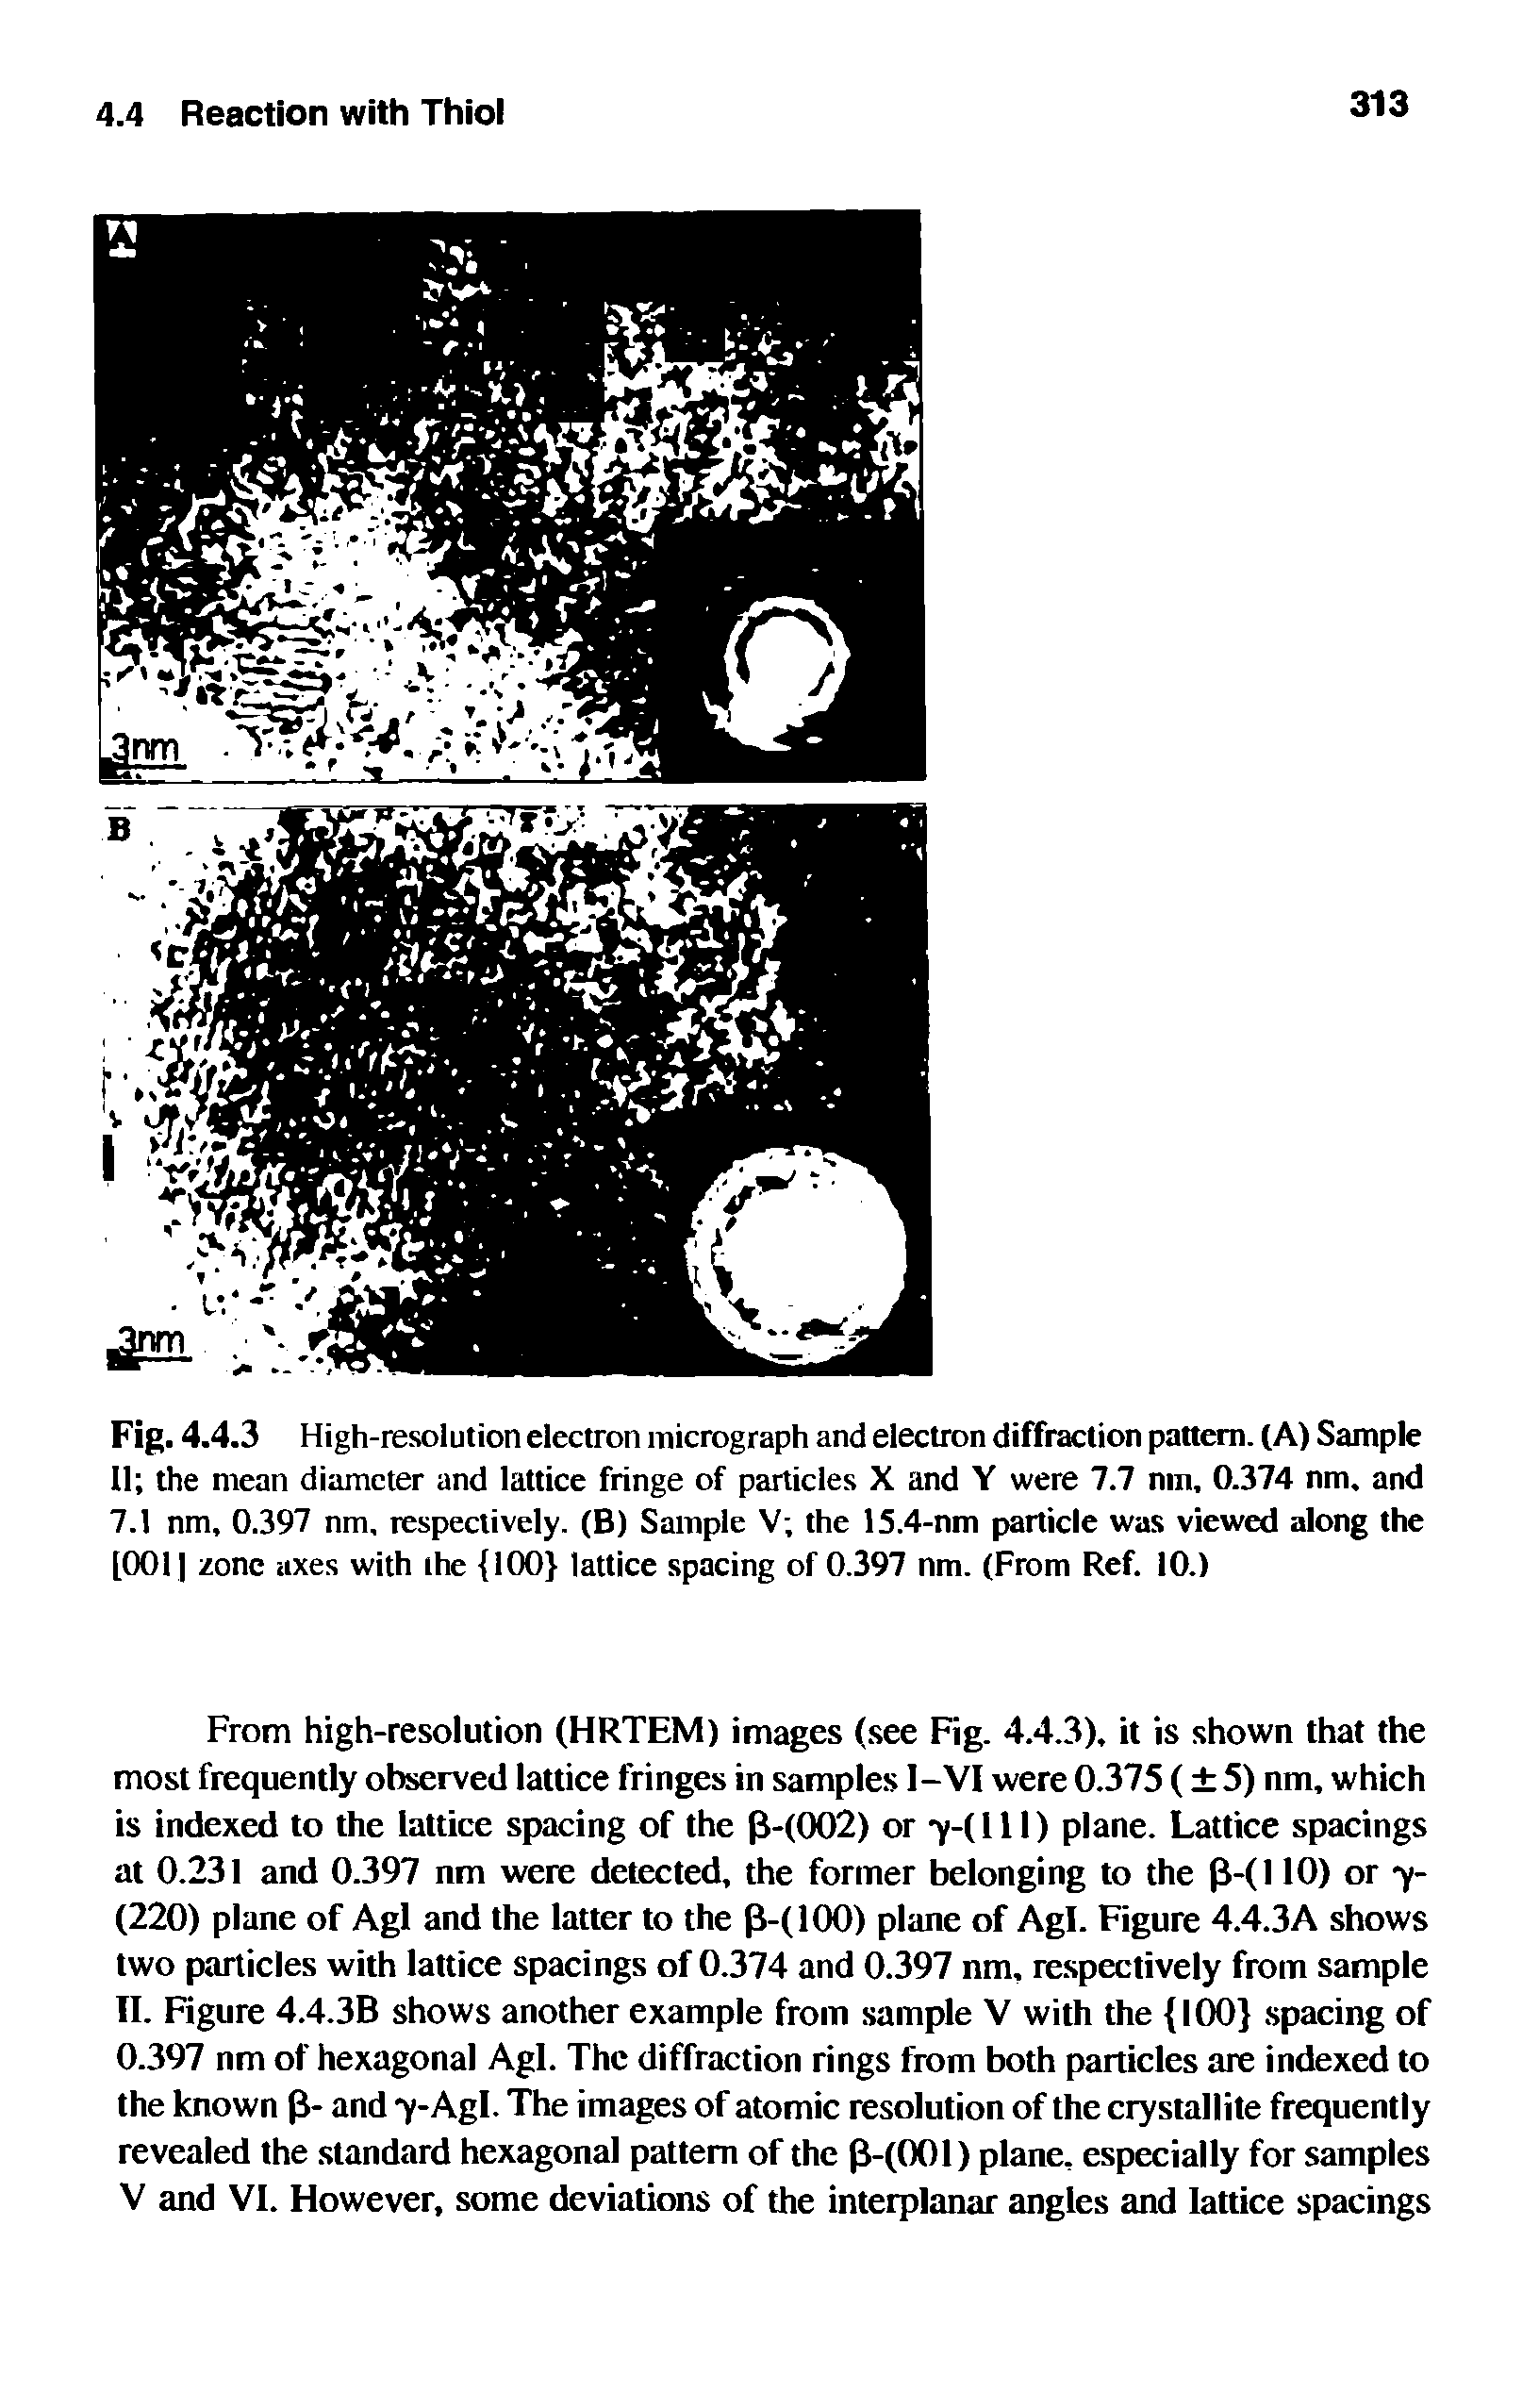 Fig. 4.4.3 High-resolution electron micrograph and electron diffraction pattern. (A) Sample II the mean diameter and lattice fringe of particles X and Y were 7.7 nin, 0.374 nm. and 7.1 nm, 0.397 nm, respectively. (B) Sample V the 15.4-nm particle was viewed along the [0011 zone axes with the 100 lattice spacing of 0.397 nm. (From Ref. 10.)...